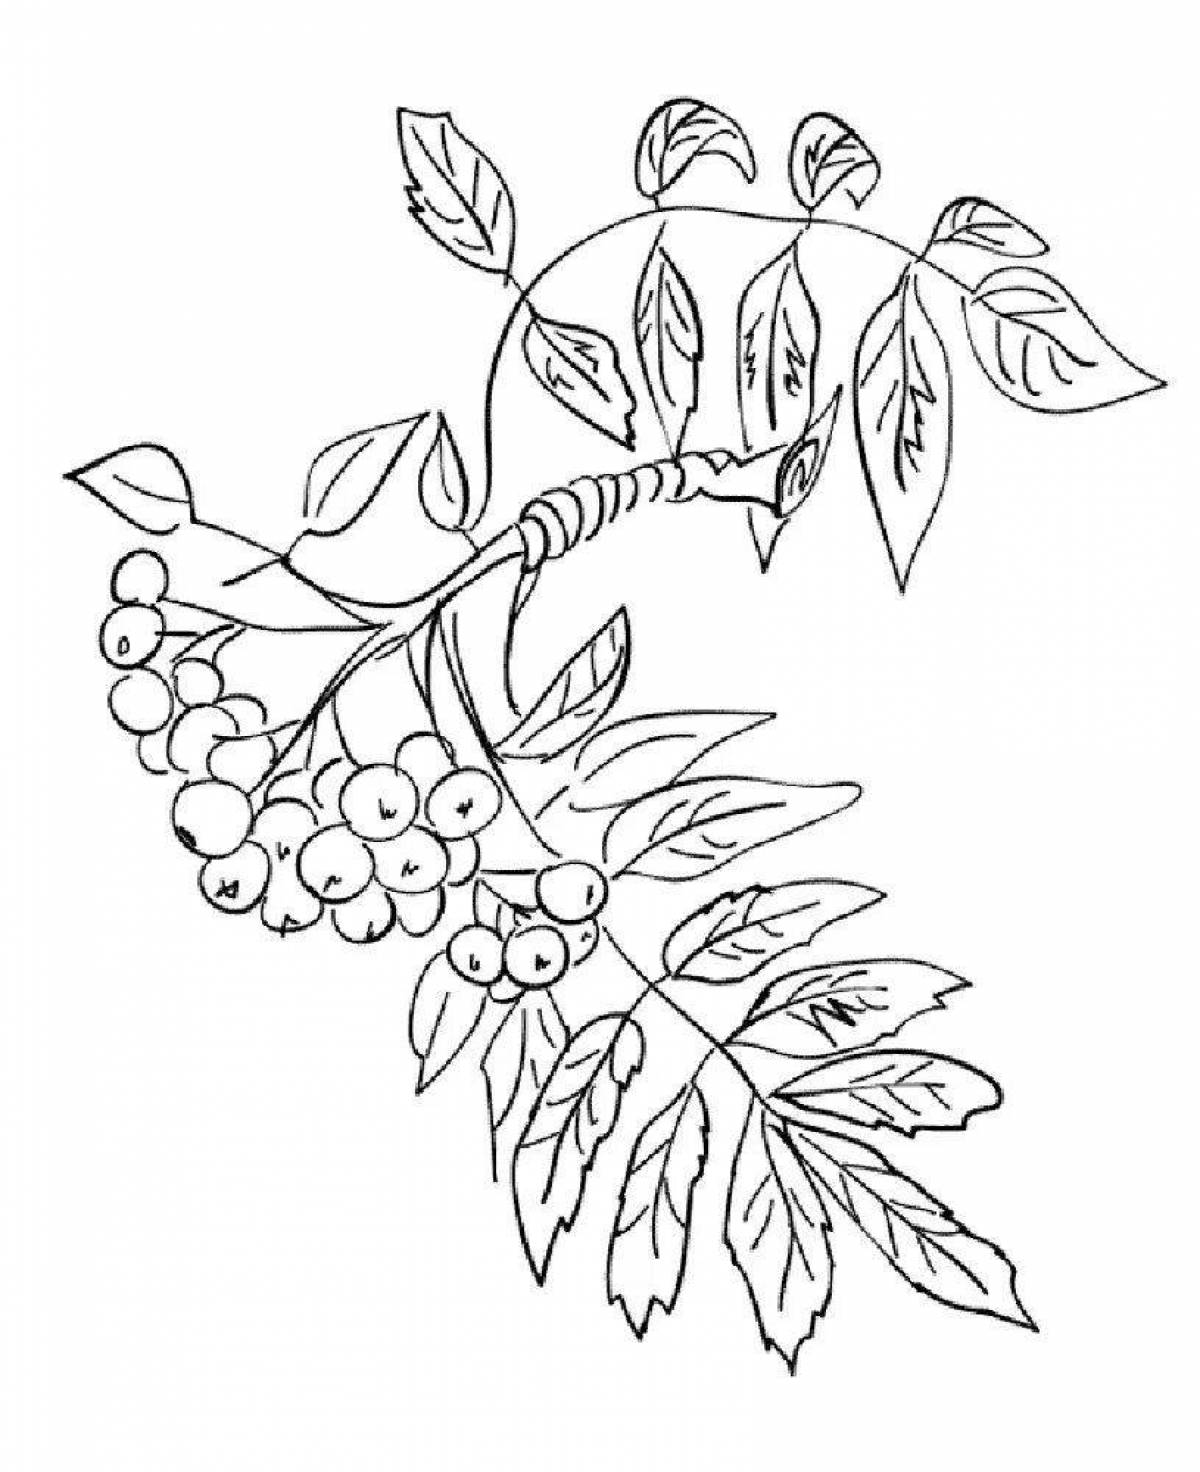 Coloring page dazzling rowan leaf